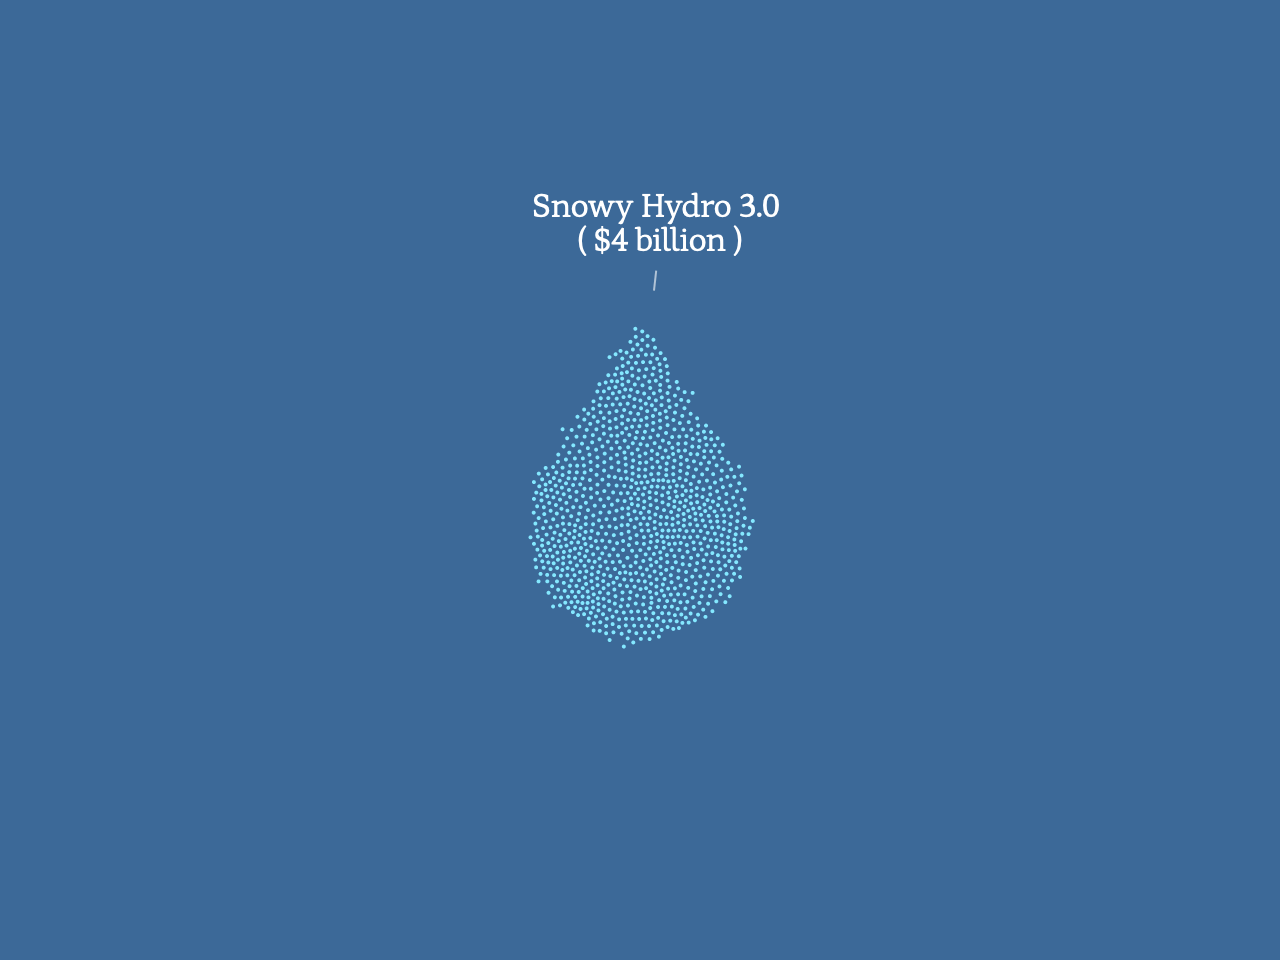 Dots in the shape of a dot of water, representing Snowy Hydro 3.0: $4 billion